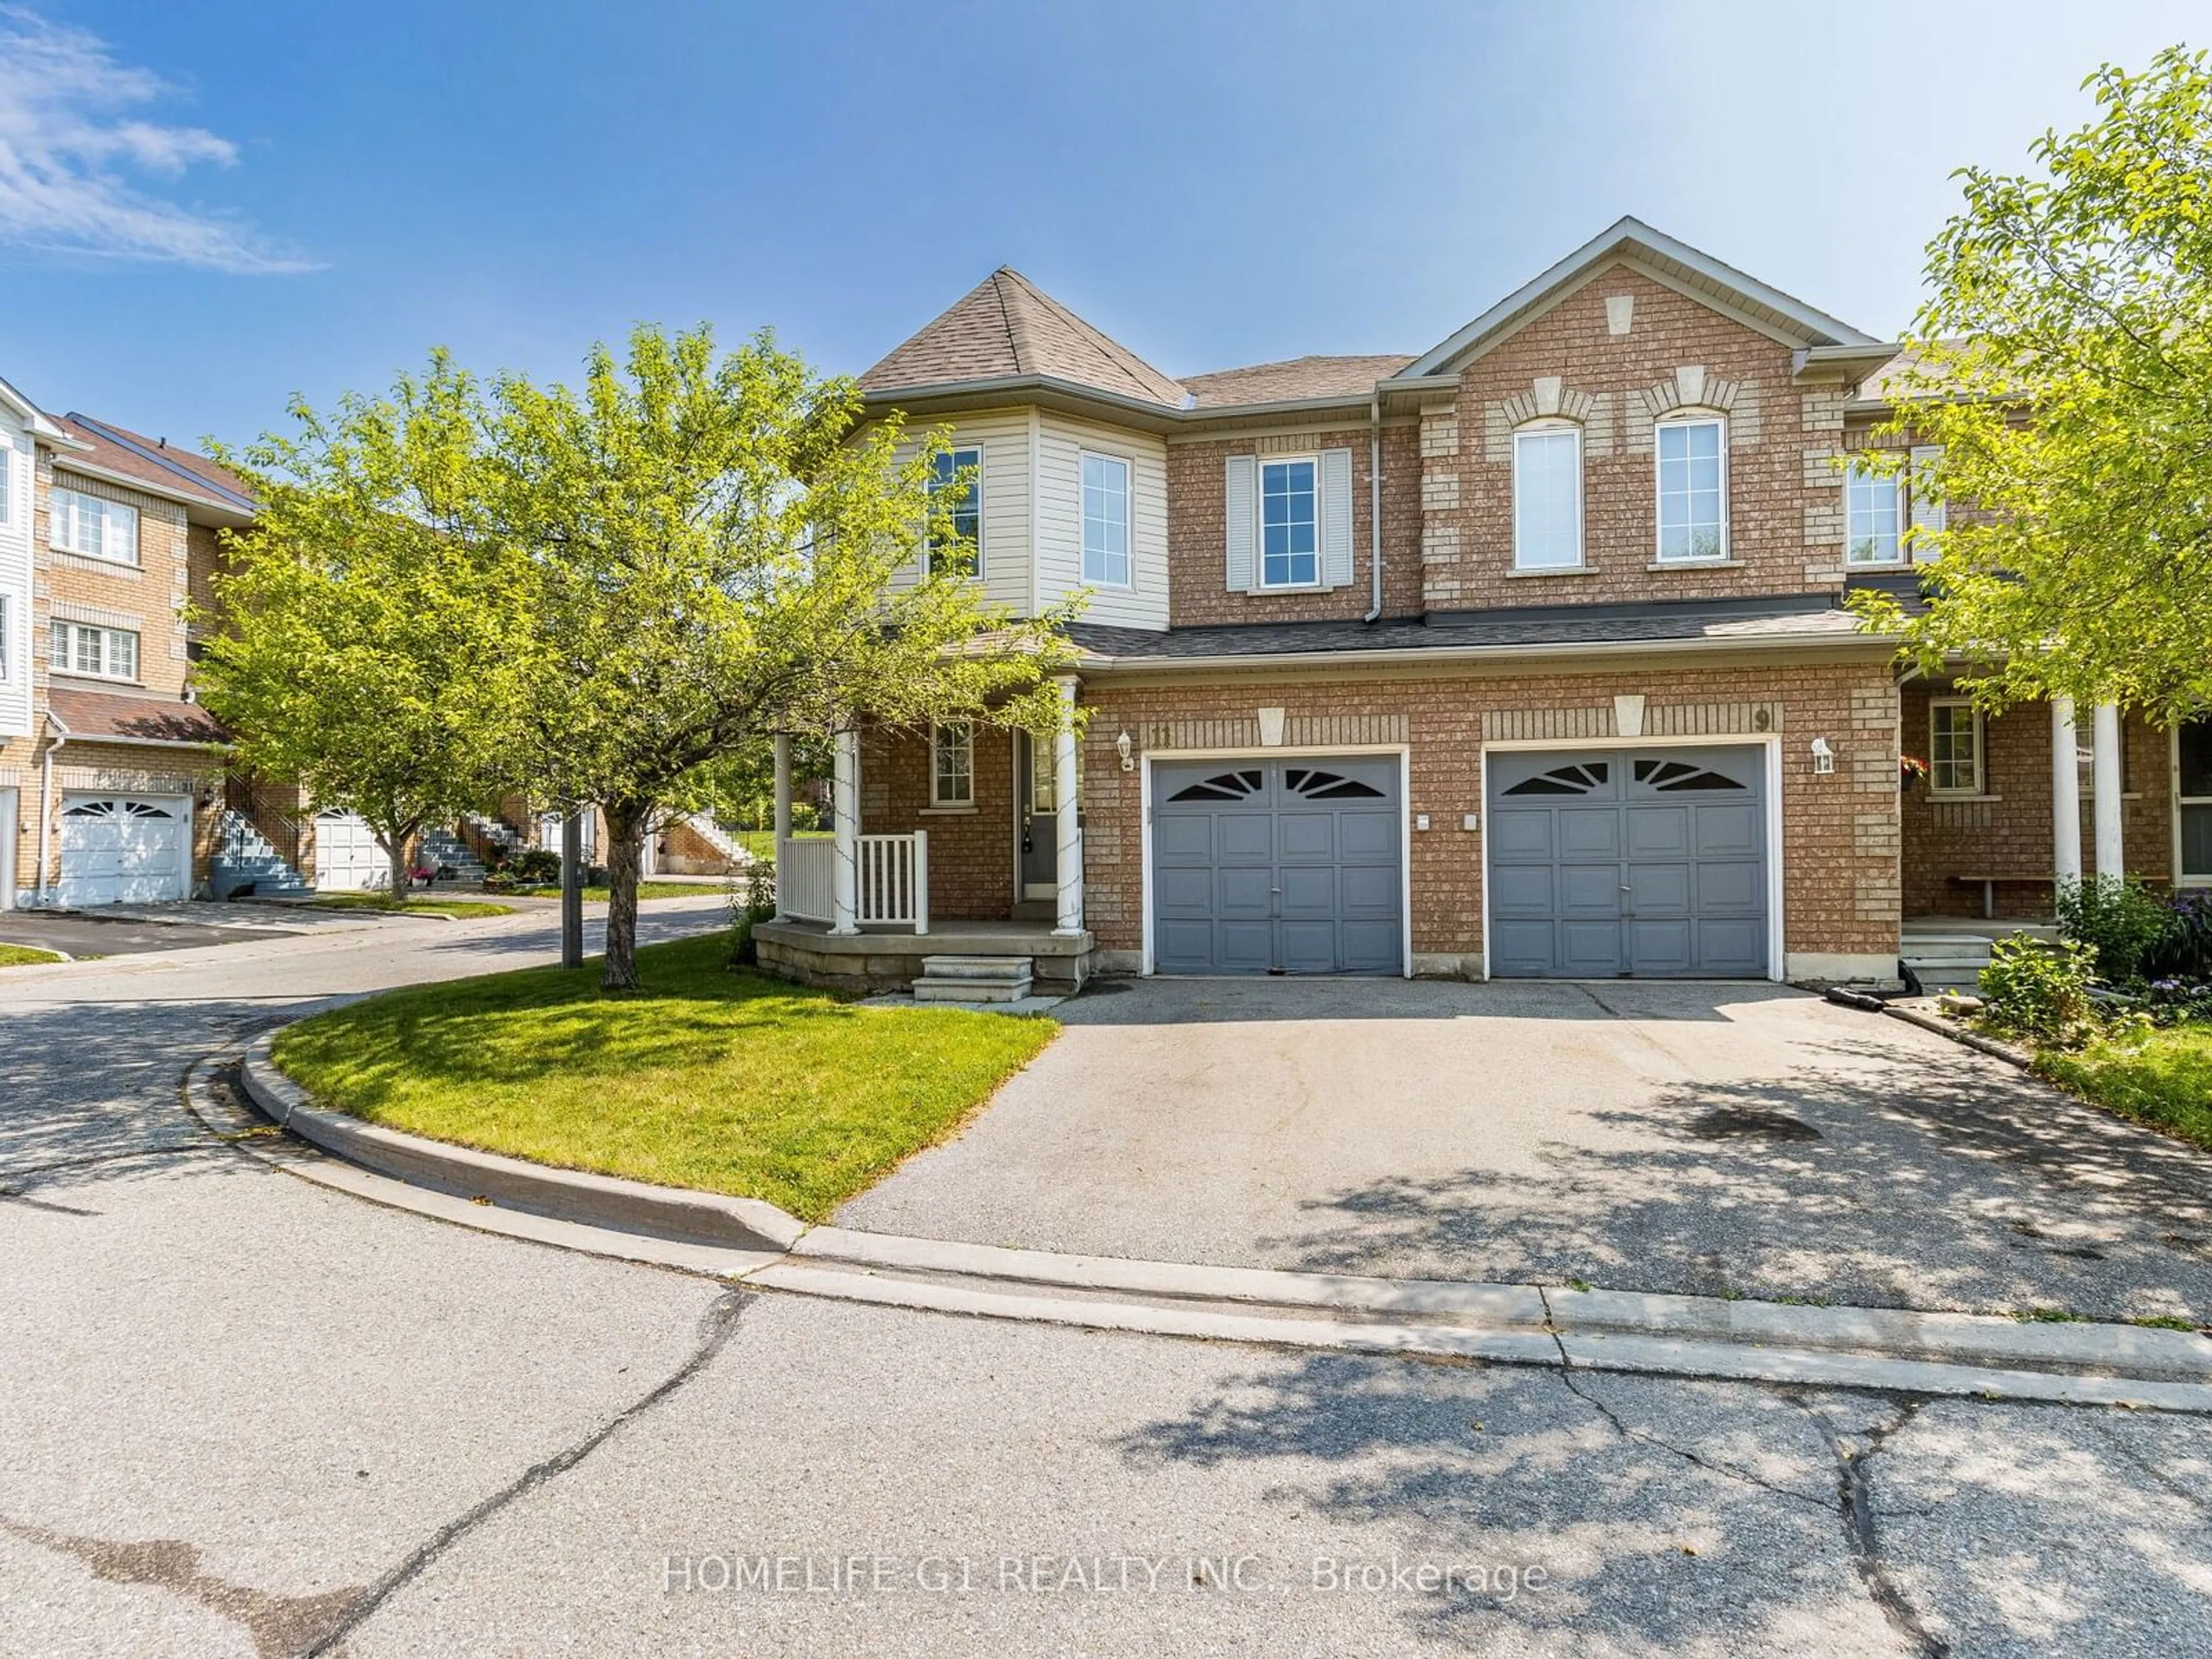 Frontside or backside of a home for 9800 Mclaughlin Rd #11, Brampton Ontario L6X 4R1